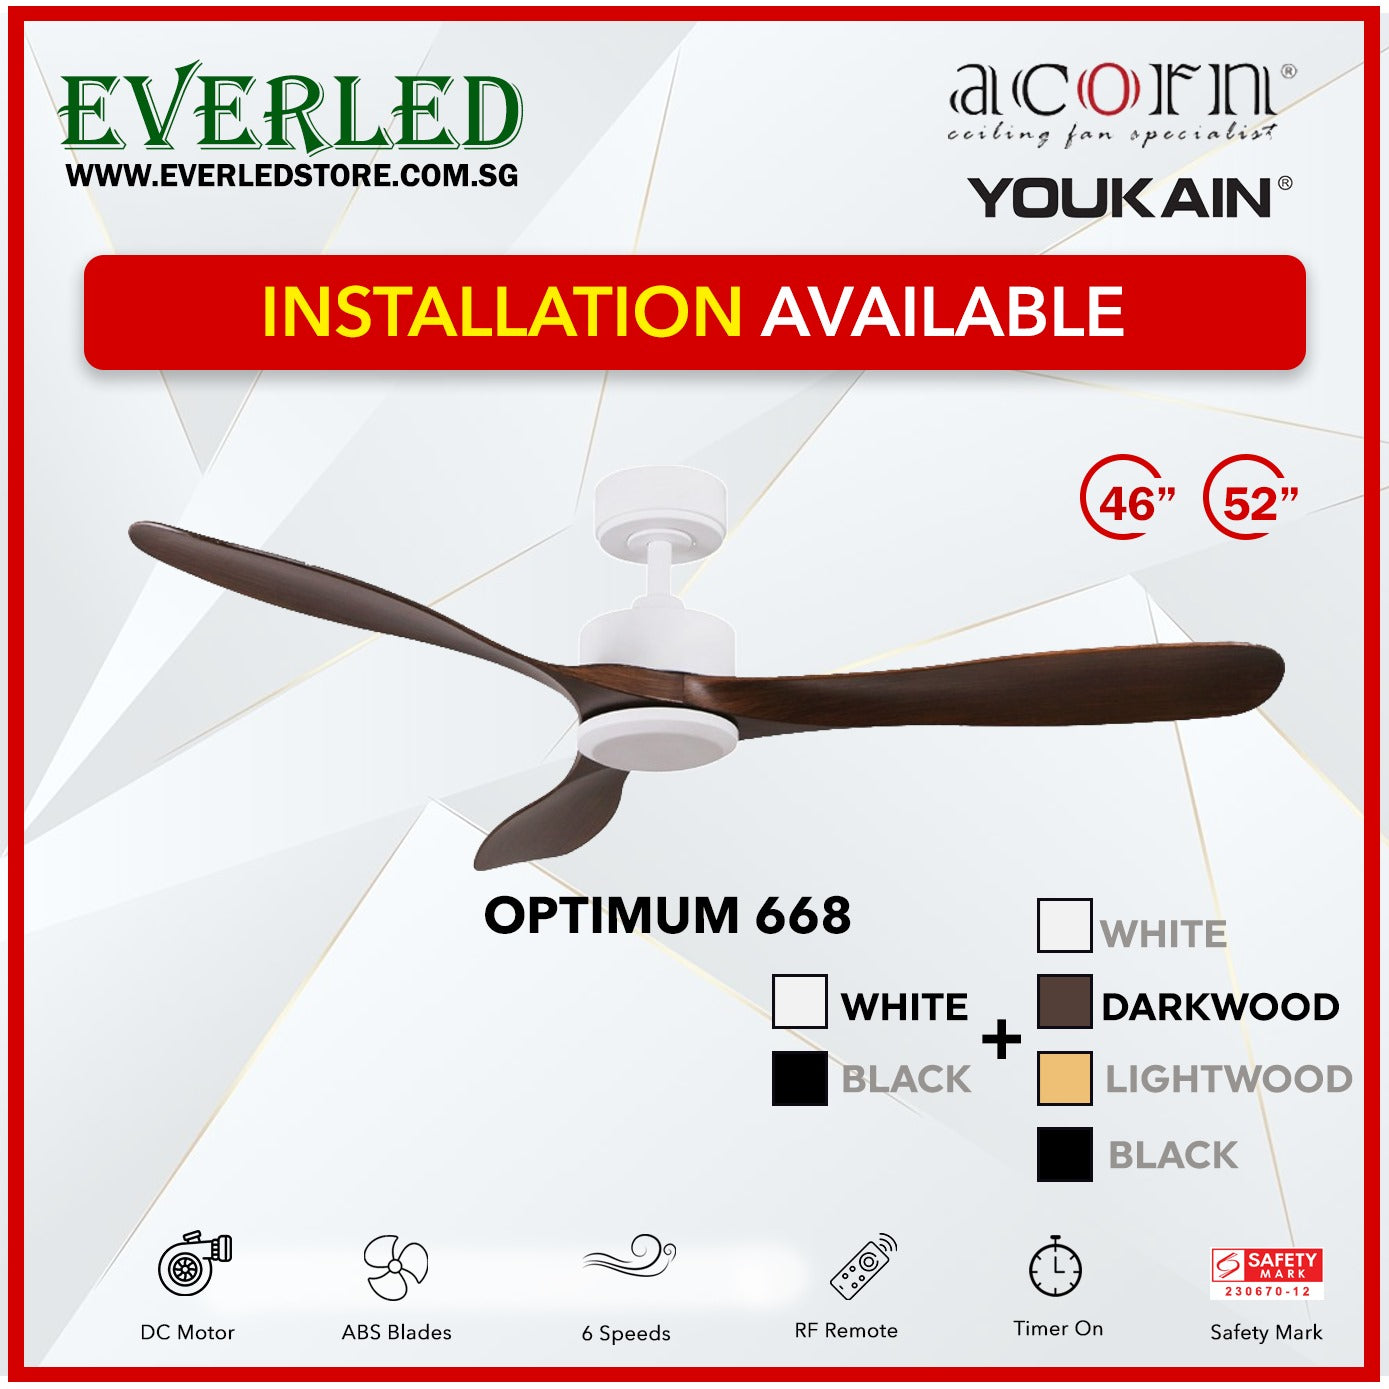 *INSTALLATION AVAILABLE* Acorn (Youkain) *SMART DC INVERTER* Optimum 668 46"/52"  with Tri-color LED